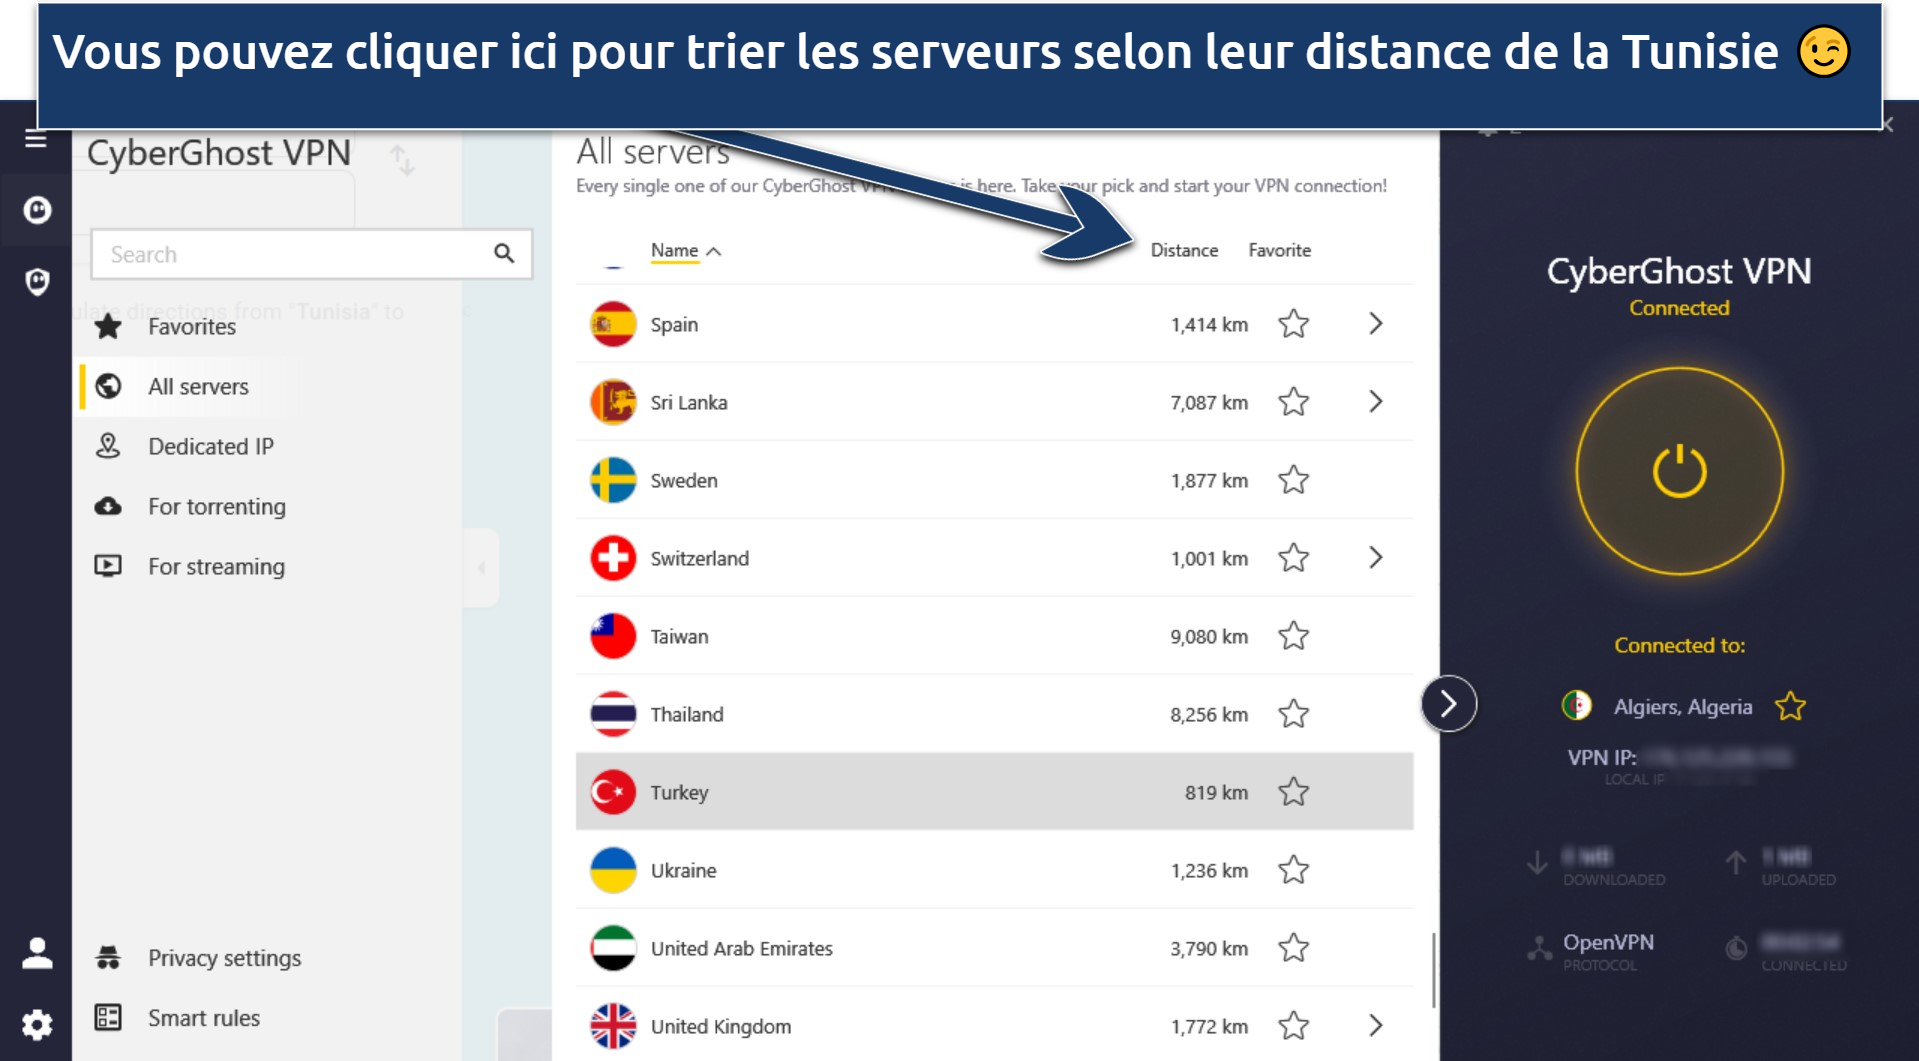 CyberGhost connected to Algeria with its interface showing the list of servers 